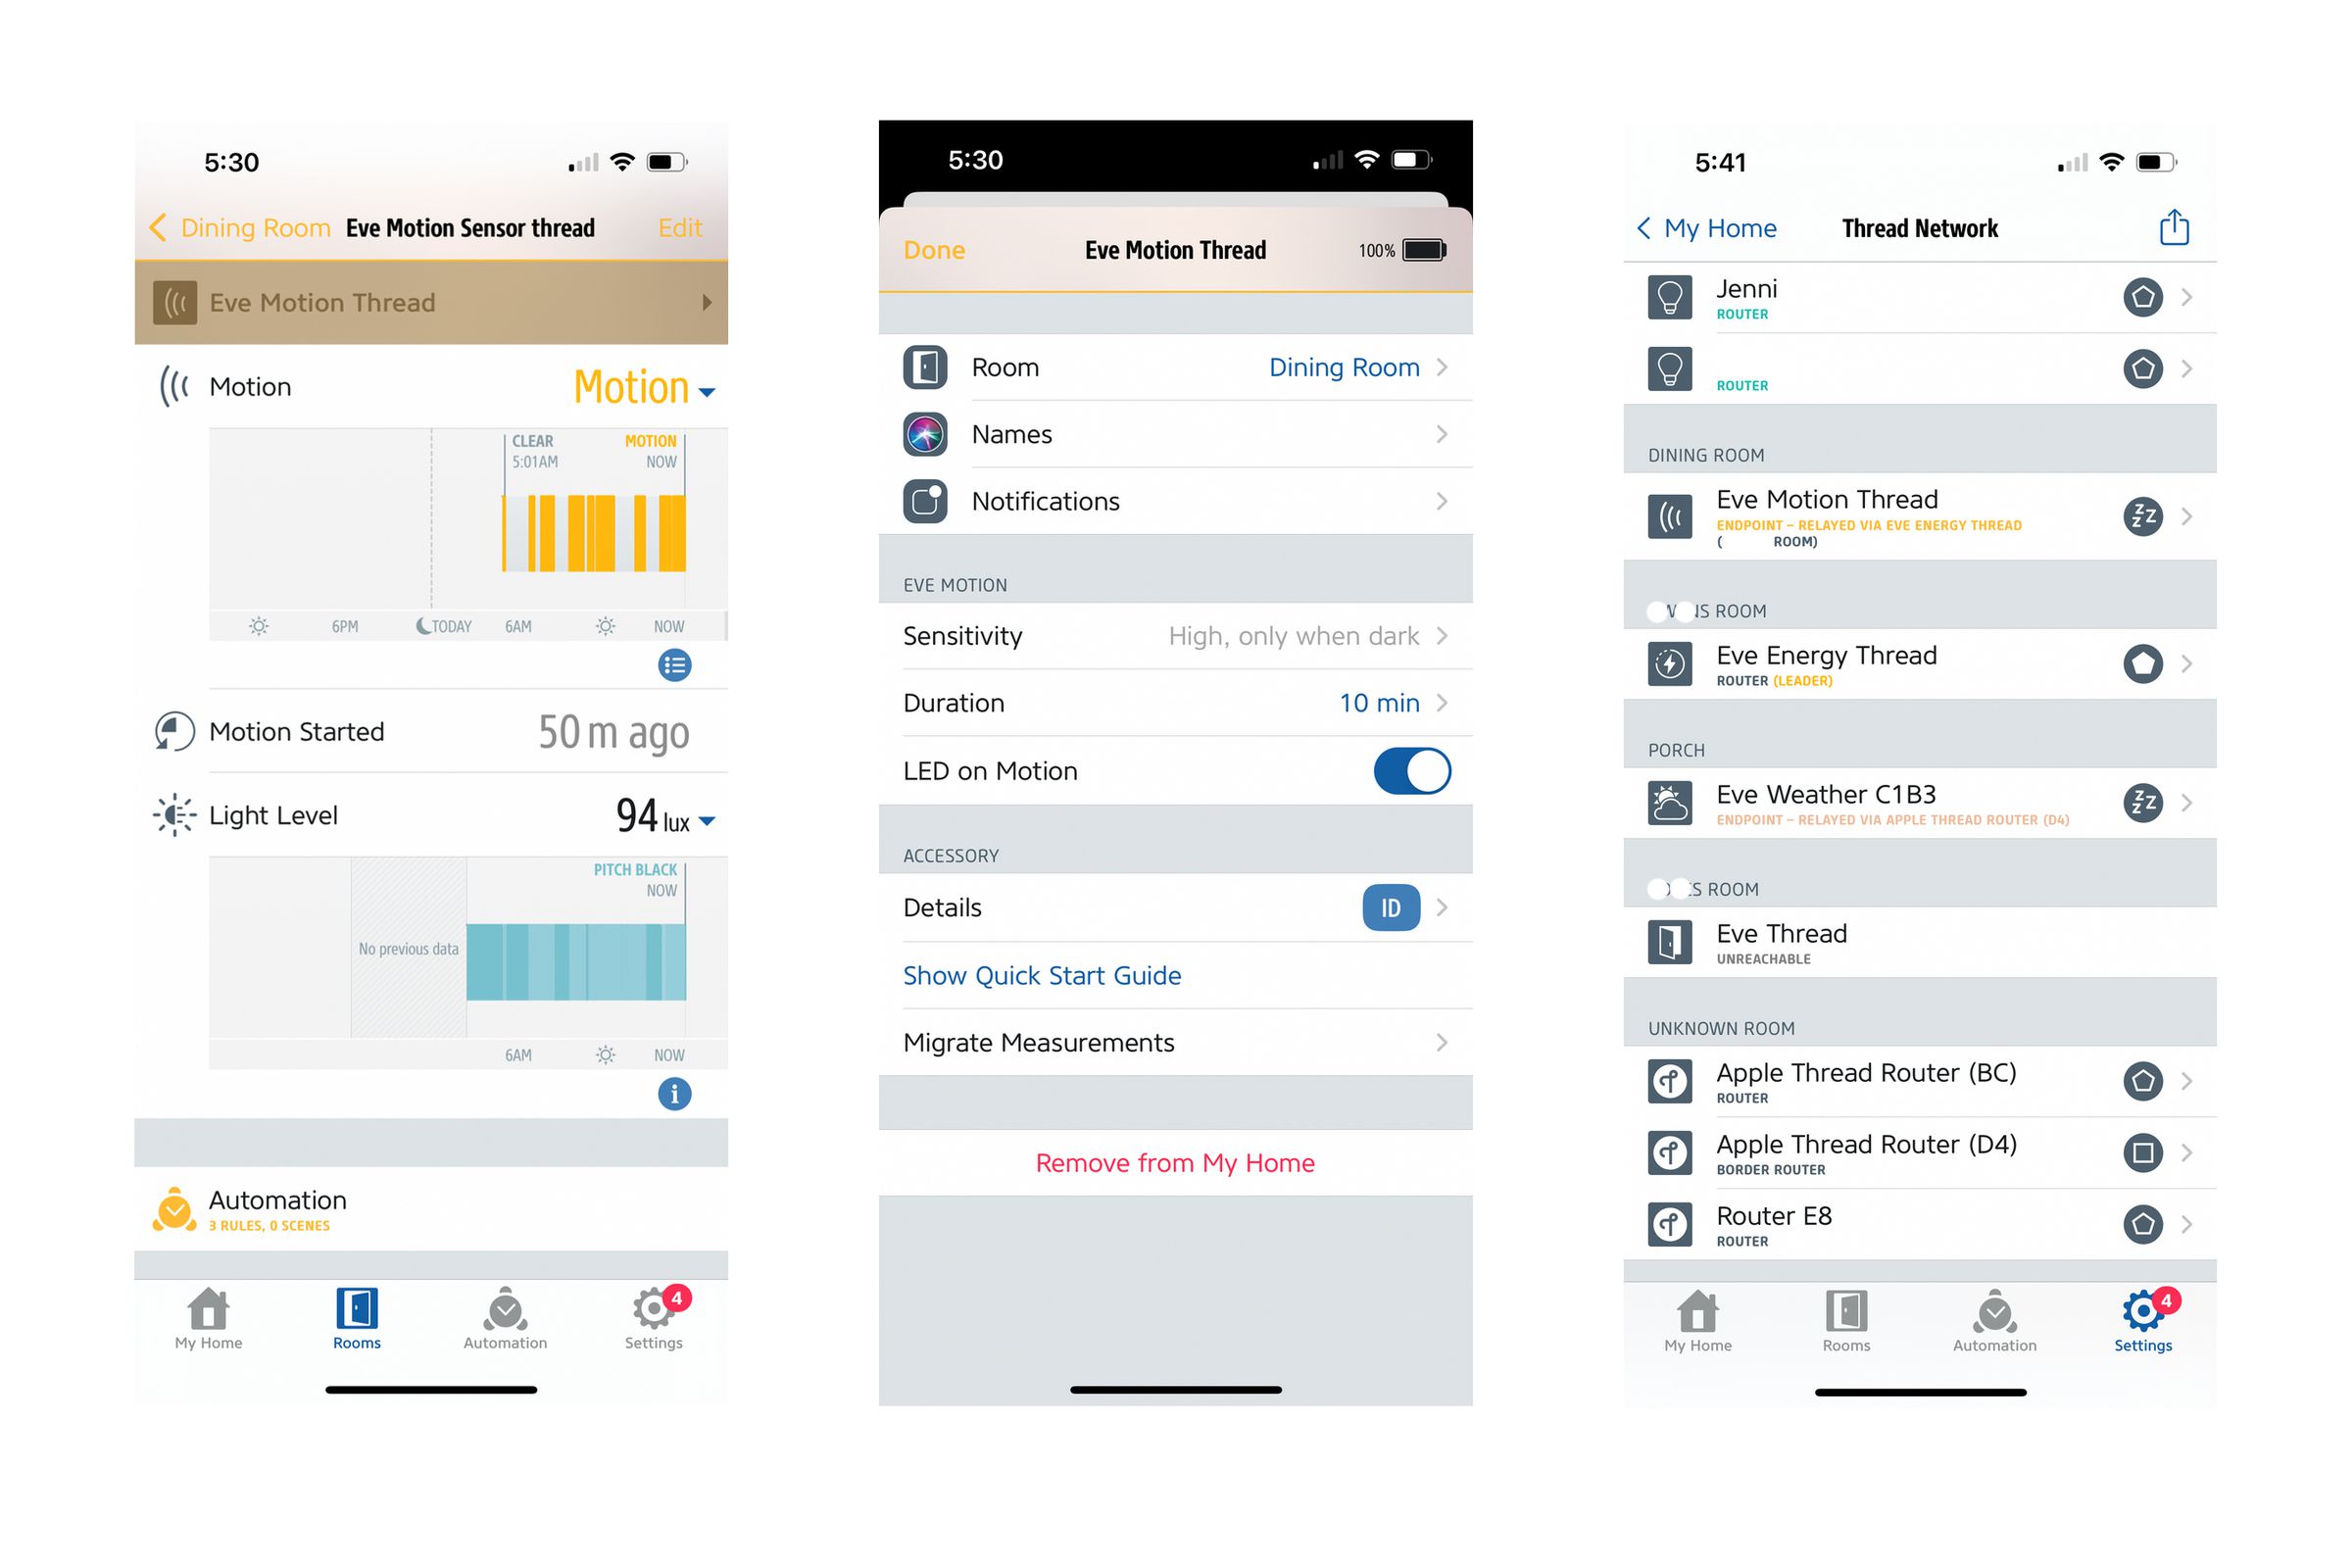 Eve’s app offers more advanced automations, data insight, and an overview of your Thread network. It shows all HomeKit devices — not just Eve products. 